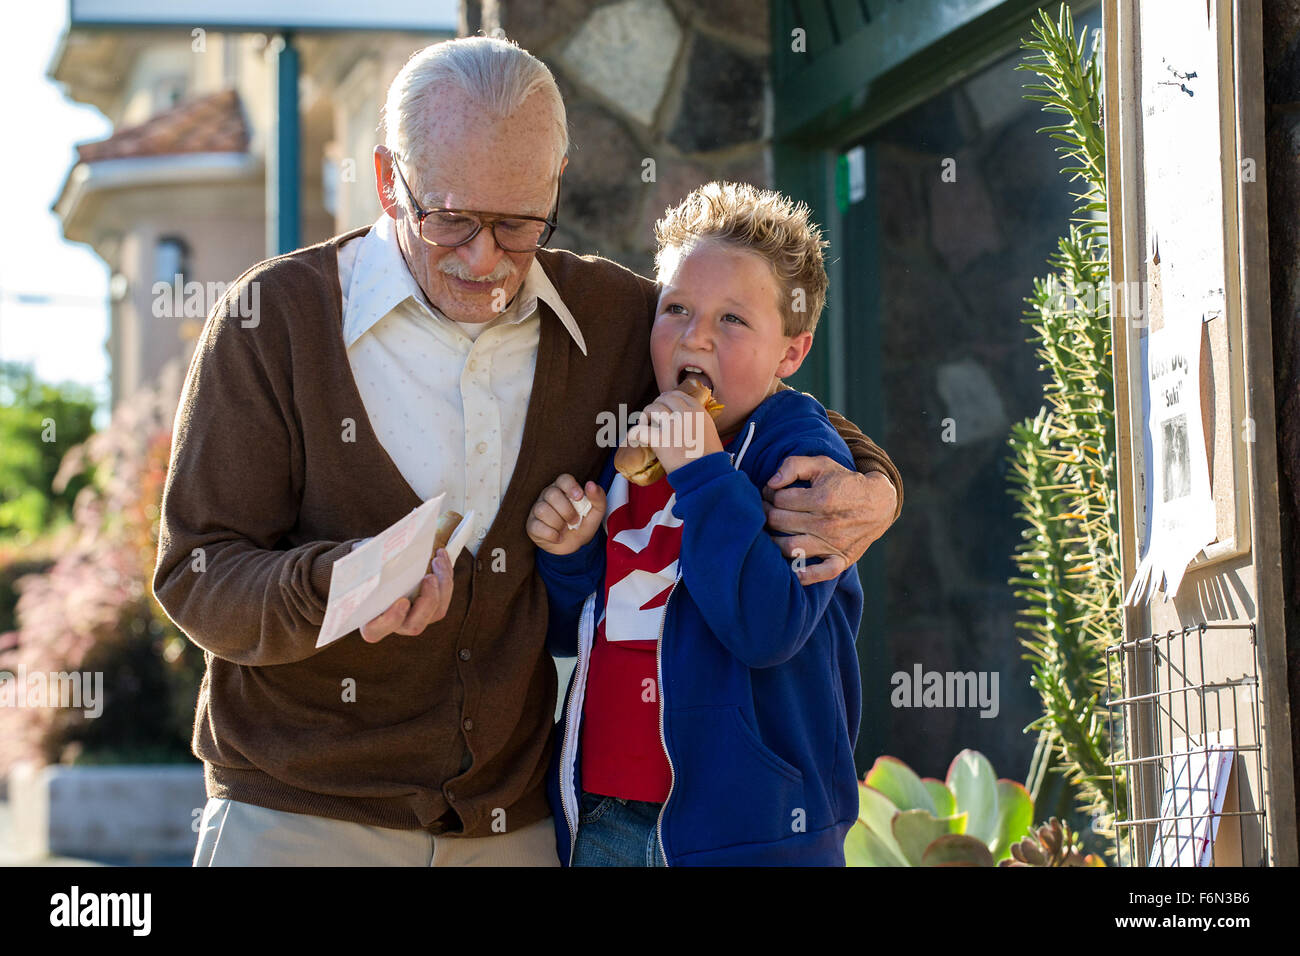 RELEASE DATE: October 25, 2013 TITLE: Jackass Presents: Bad Grandpa STUDIO: Paramount Pictures MTV Films DIRECTOR: Jeff Tremaine PLOT: 86-year-old Irving Zisman takes a trip from Nebraska to North Carolina to take his 8 year-old grandson, Billy, back to his real father PICTURED: JOHNNY KNOXVILLE as Irving Zisman and JACKSON NICOLL as Billy (Credit: c Paramount Pictures/Entertainment Pictures) Stock Photo